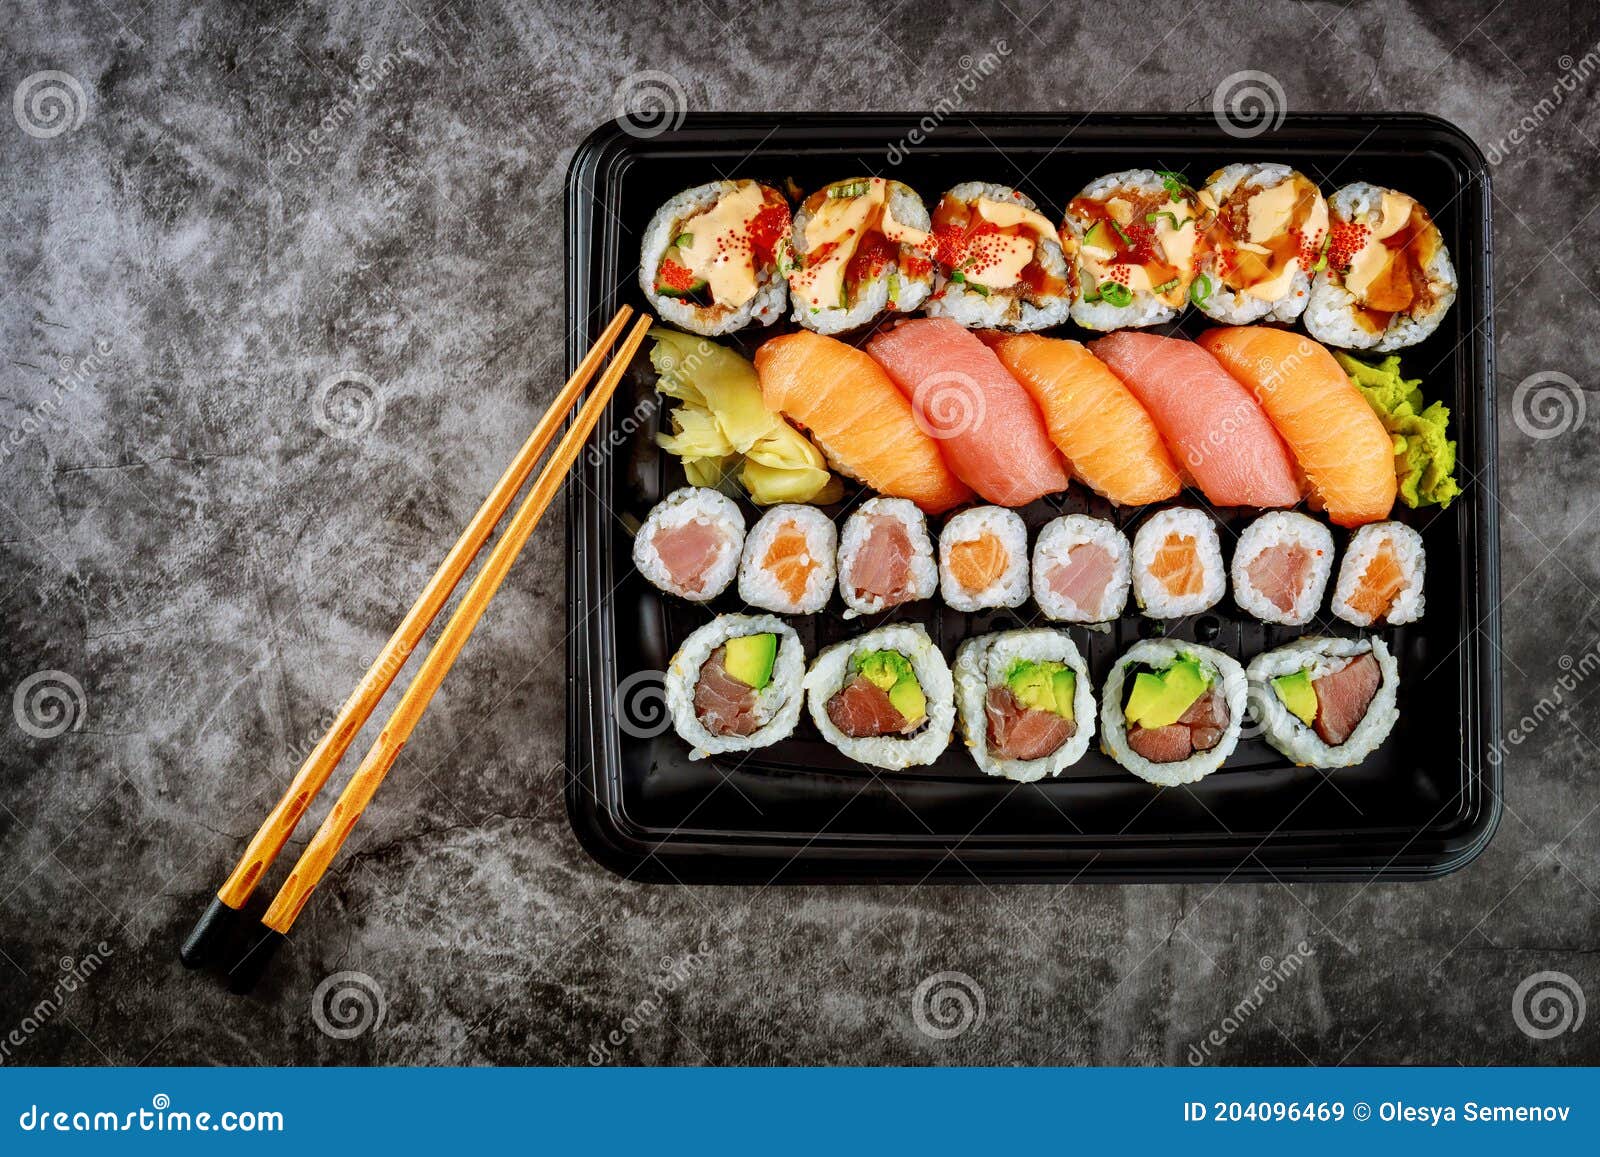 https://thumbs.dreamstime.com/z/assortment-sushi-roll-set-black-tray-japanese-food-top-view-assortment-sushi-roll-set-black-tray-japanese-food-204096469.jpg